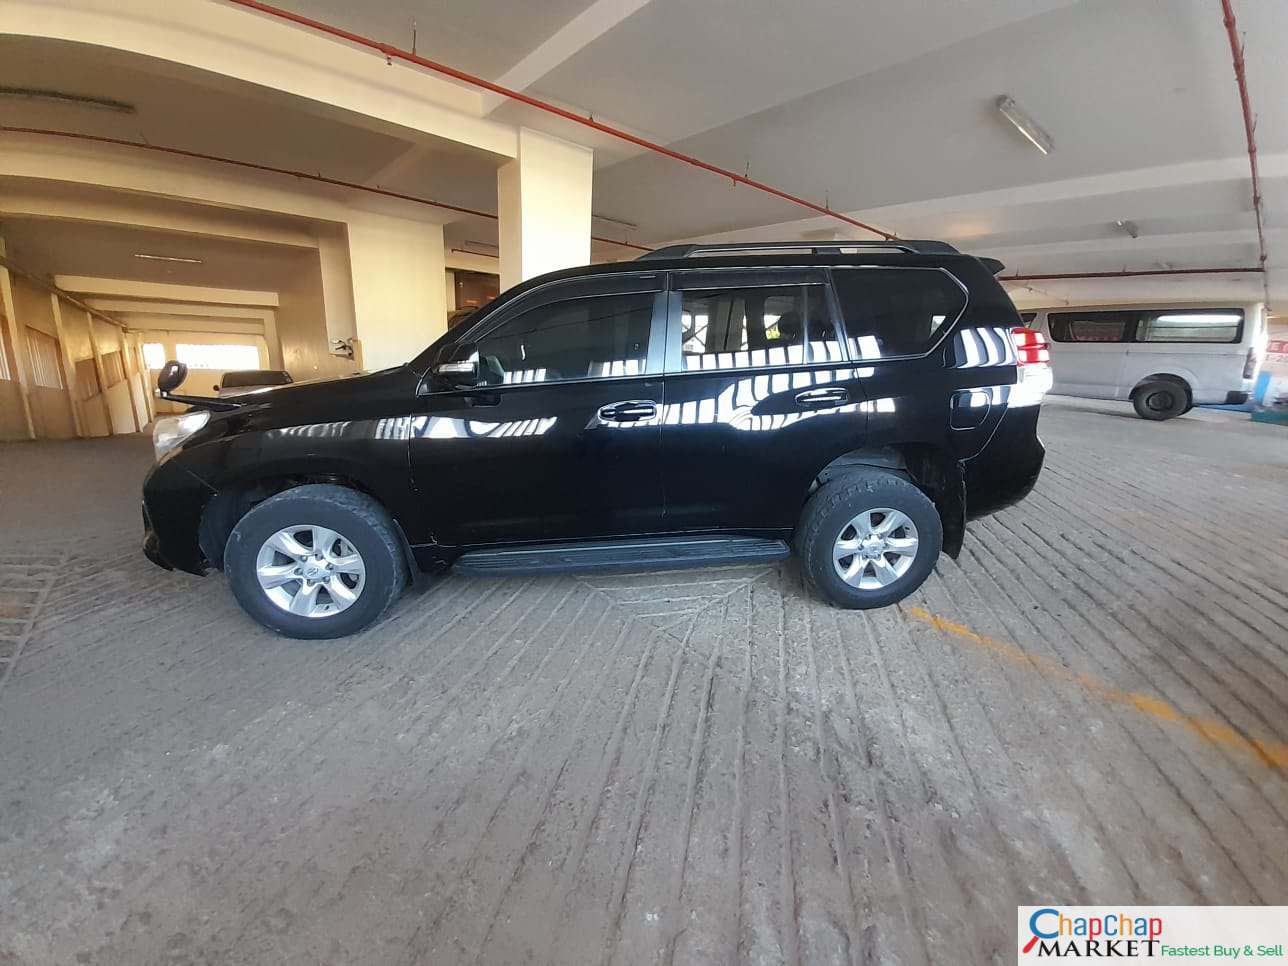 Toyota Prado j150 with SUNROOF You Pay 40% Deposit 70% installments Trade in OK as New